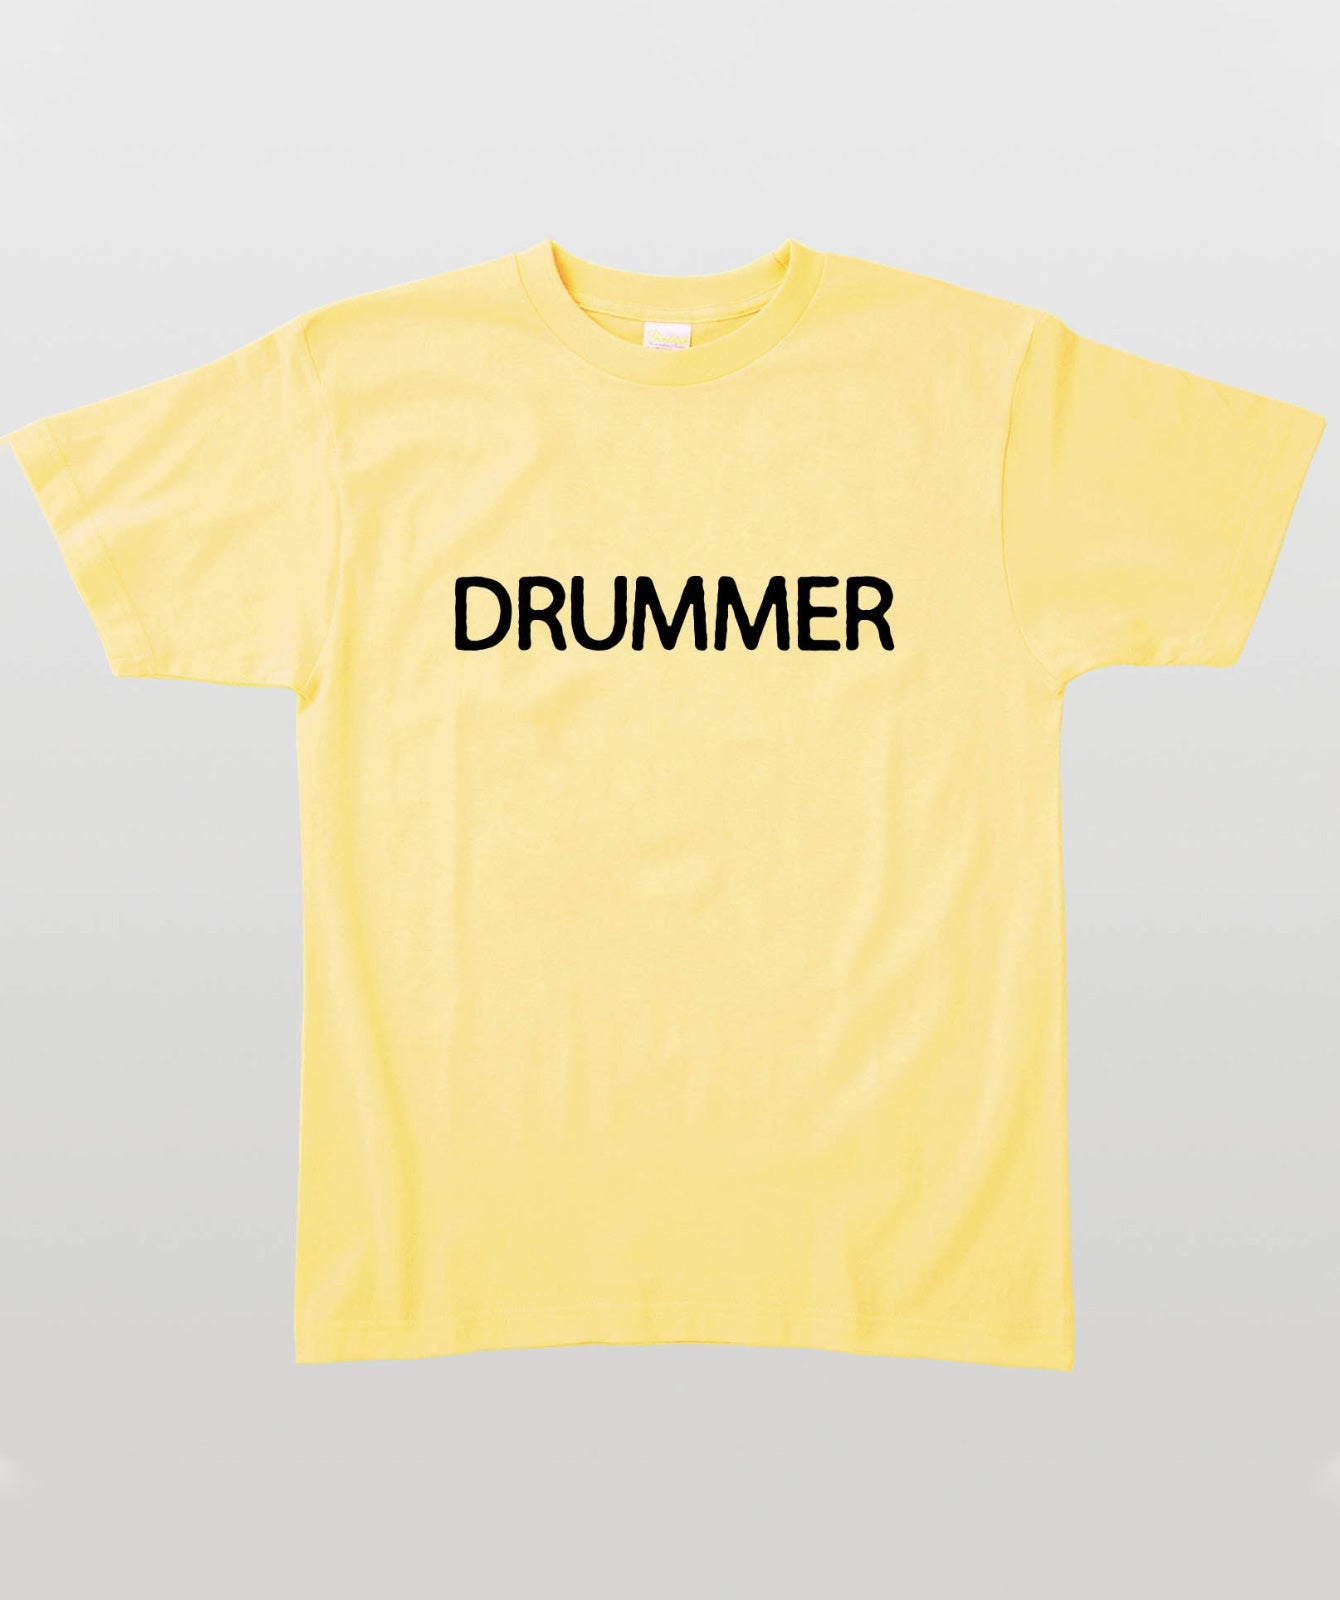 MS PLAYER SERIES ～DRUMMER Type A～